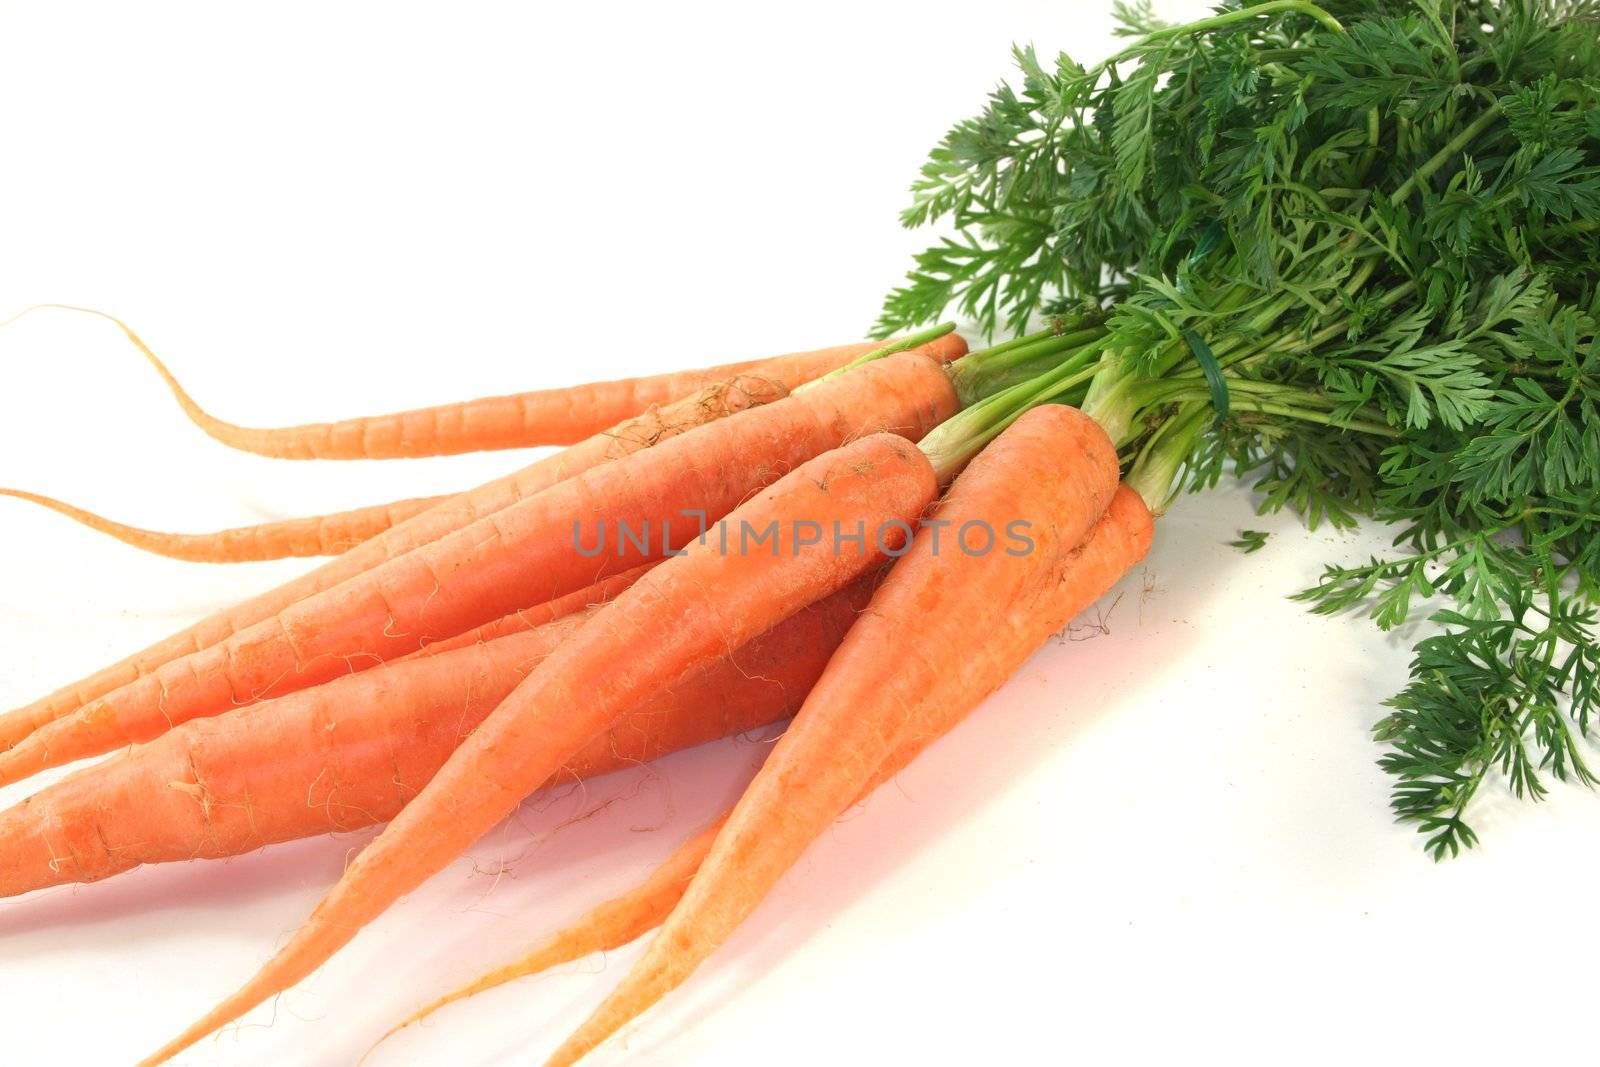 a bundle of carrots on a white background